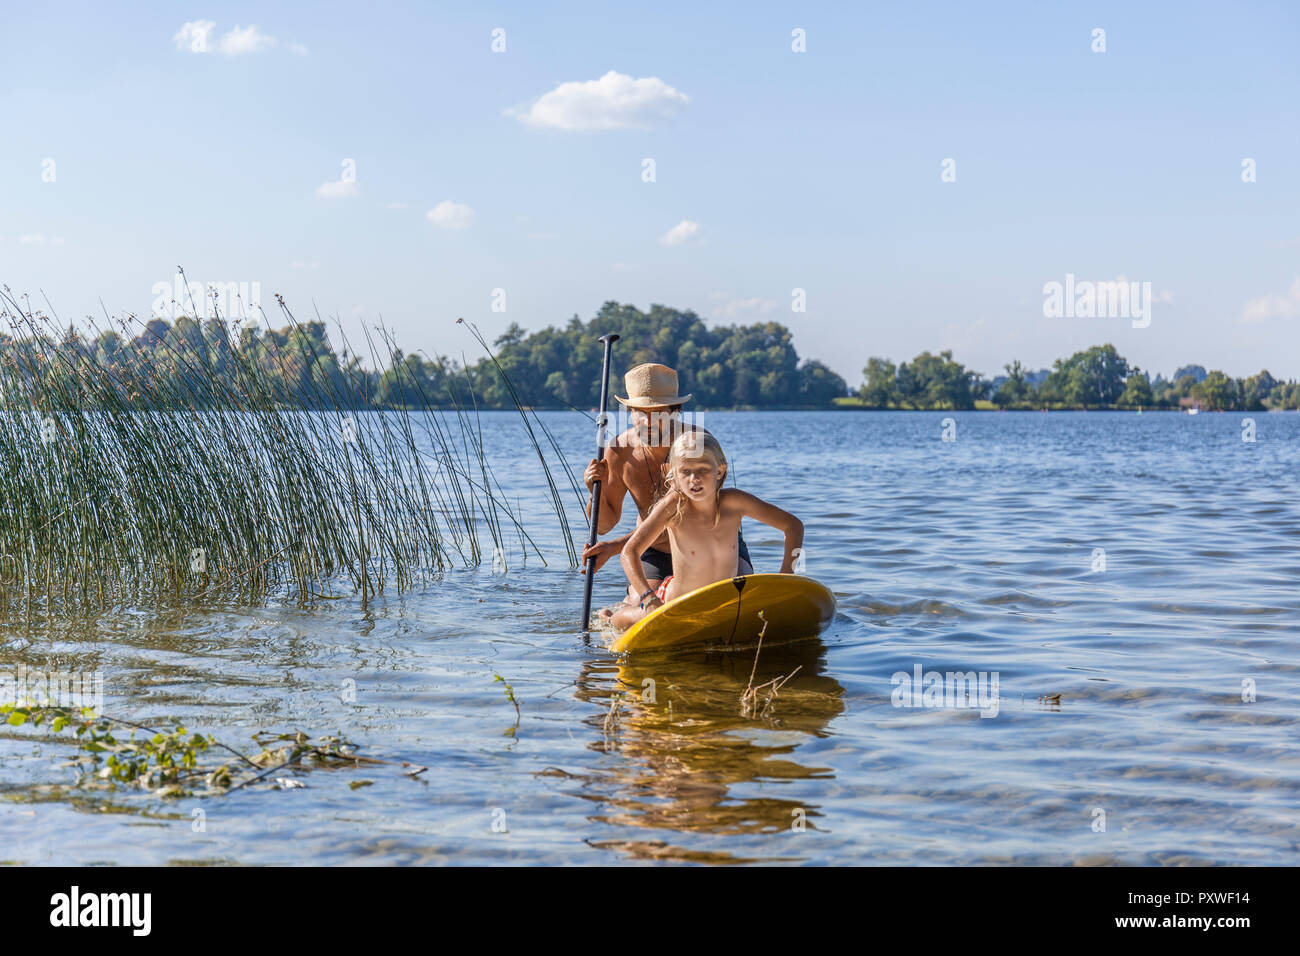 Father and daughter paddle boarding on lake Stock Photo